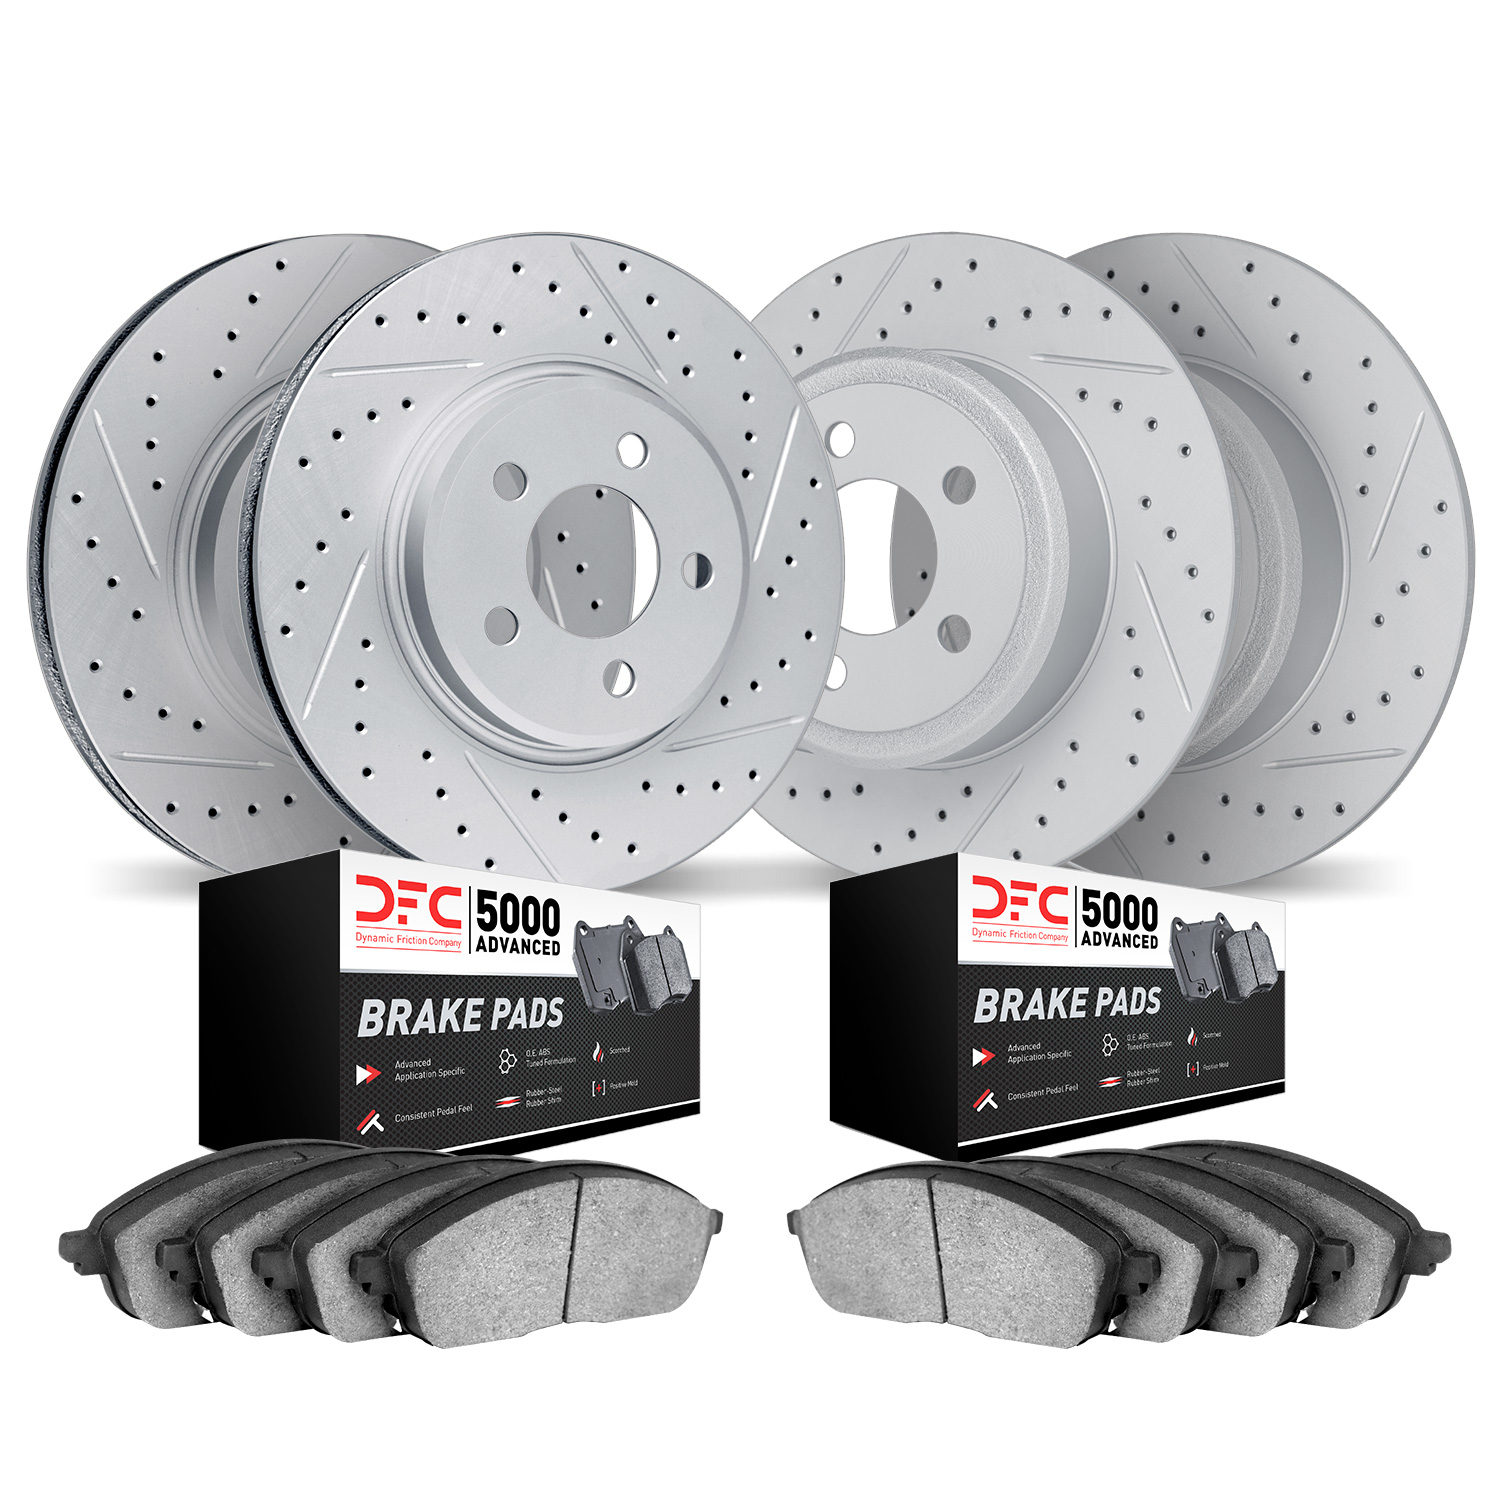 2504-74022 Geoperformance Drilled/Slotted Rotors w/5000 Advanced Brake Pads Kit, 2011-2014 Audi/Volkswagen, Position: Front and